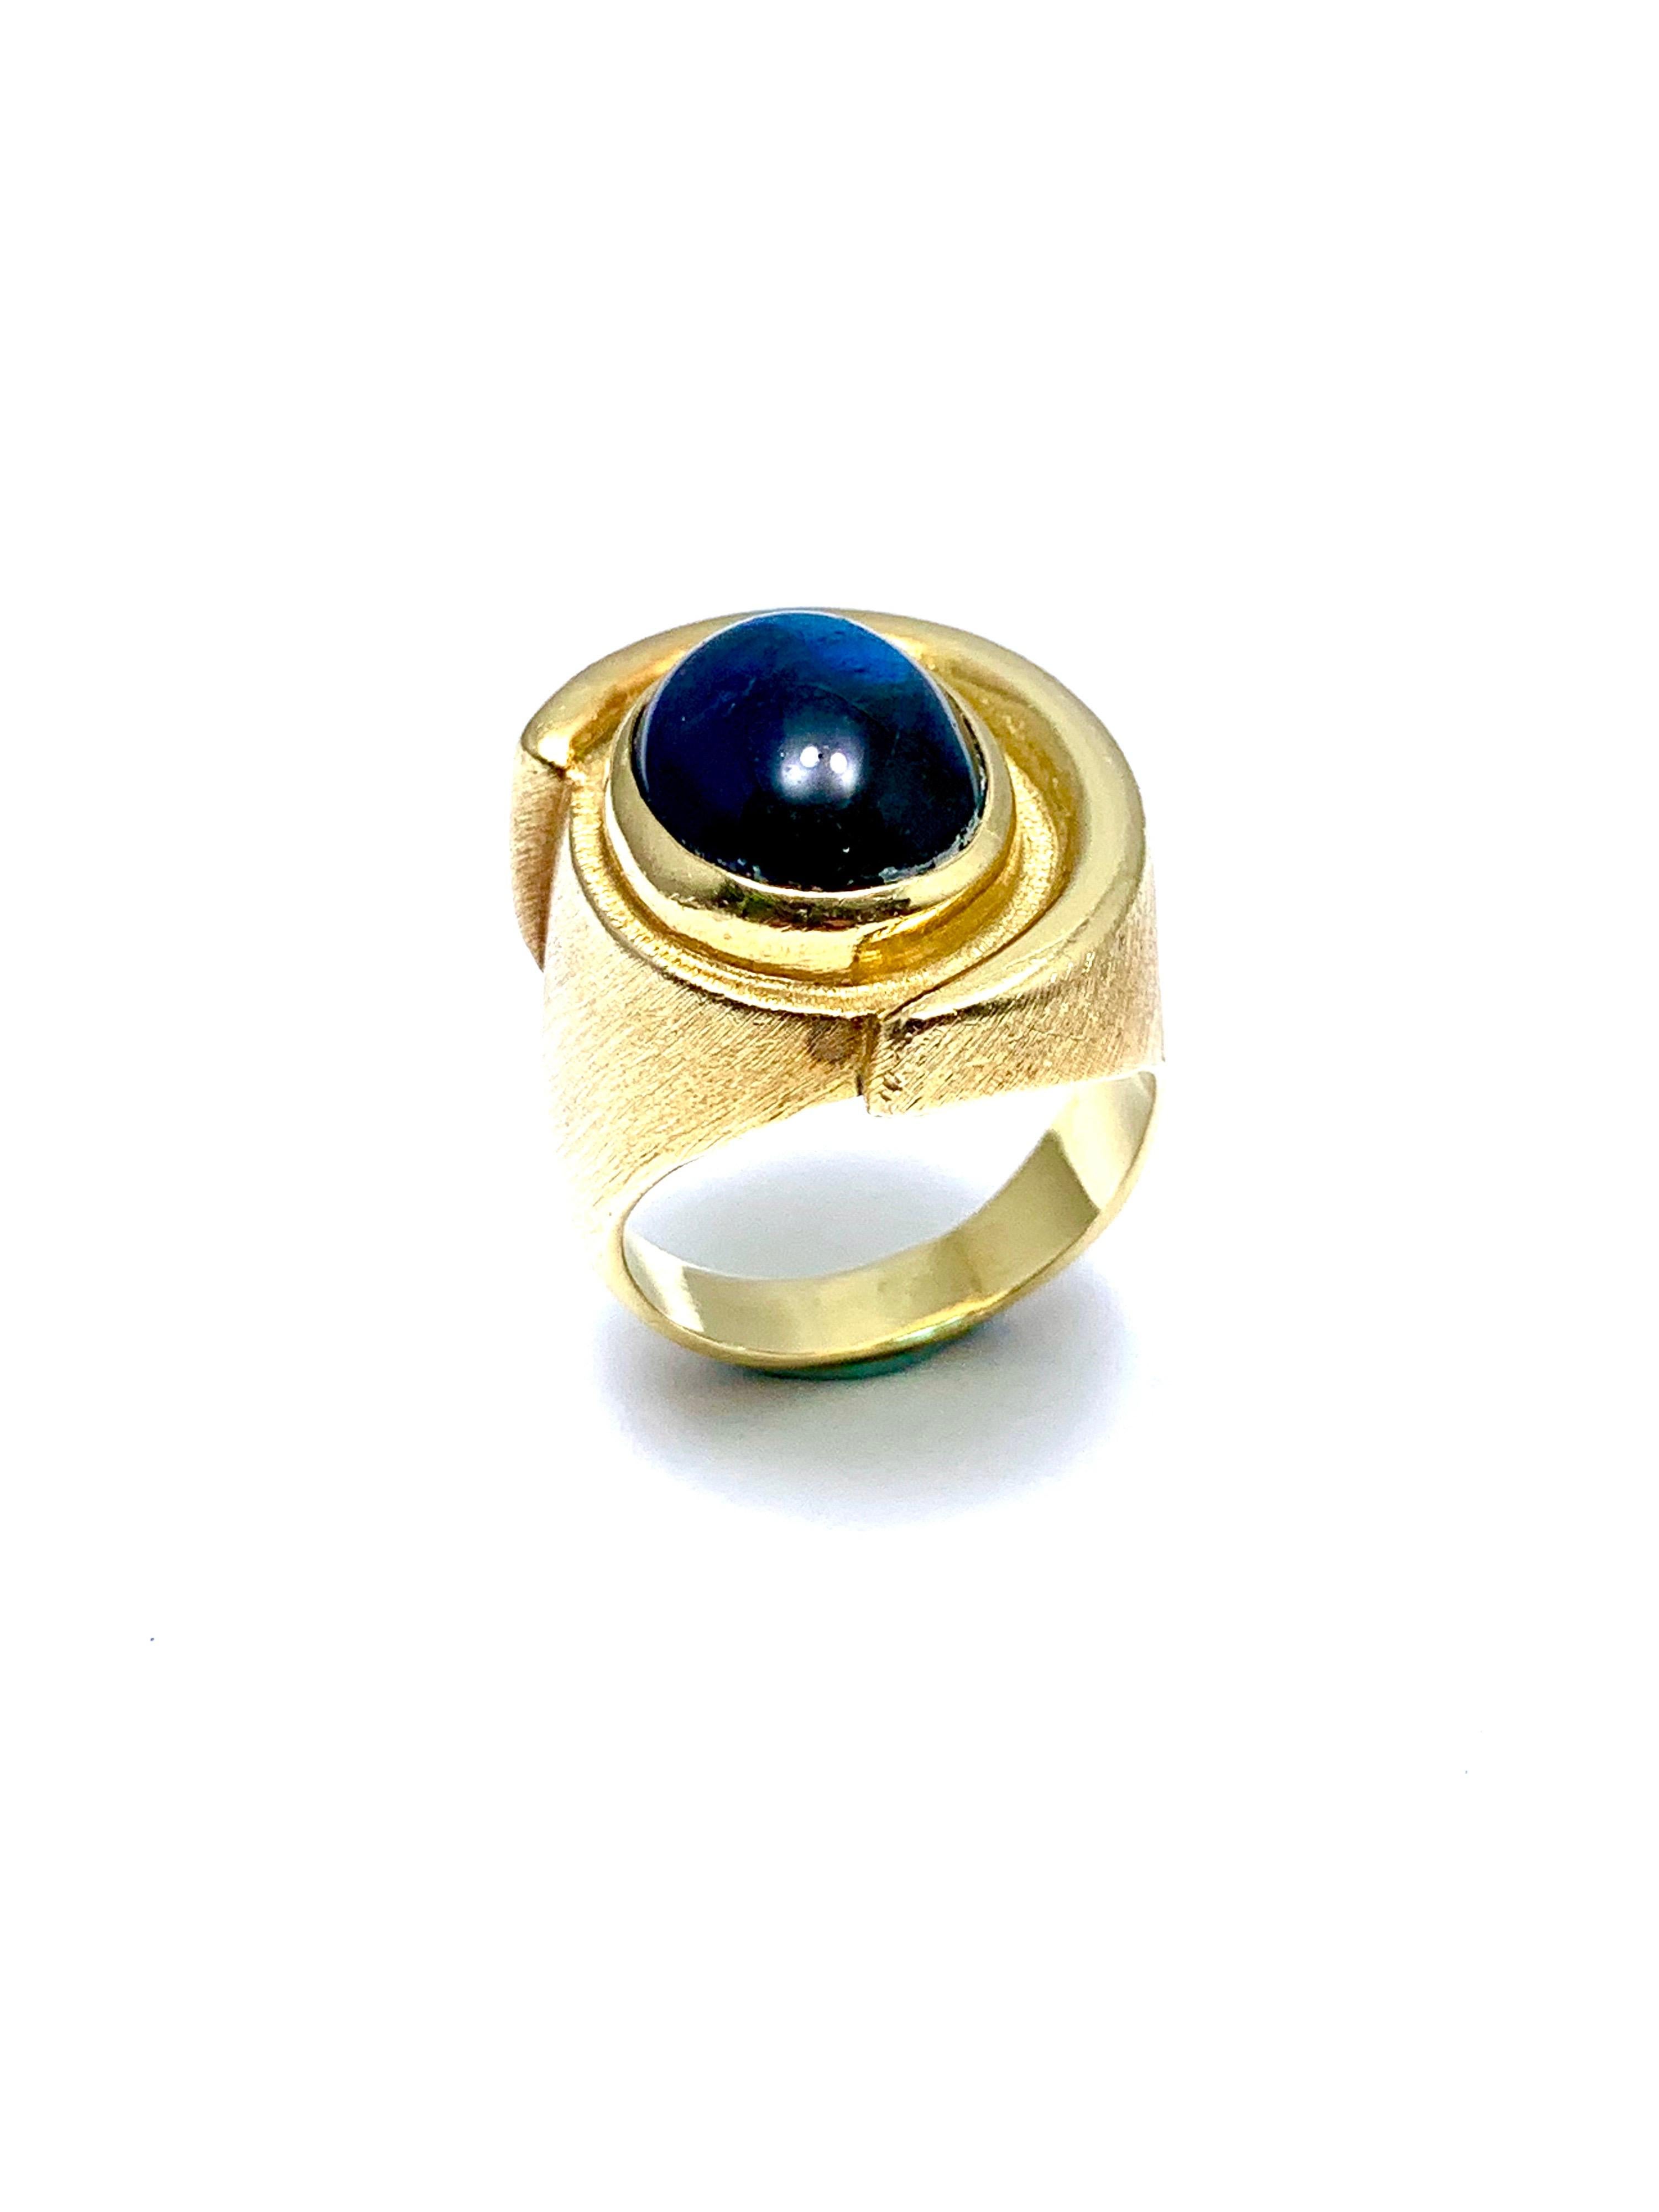 A gorgeous Indicolite Tourmaline fashion ring designed by Bruno Guidi.  The 6.43 cabochon Indicolite displays a lustrous teal color, bezel set in an 18 karat yellow gold abstarct design ring.  The inside shank is signed 